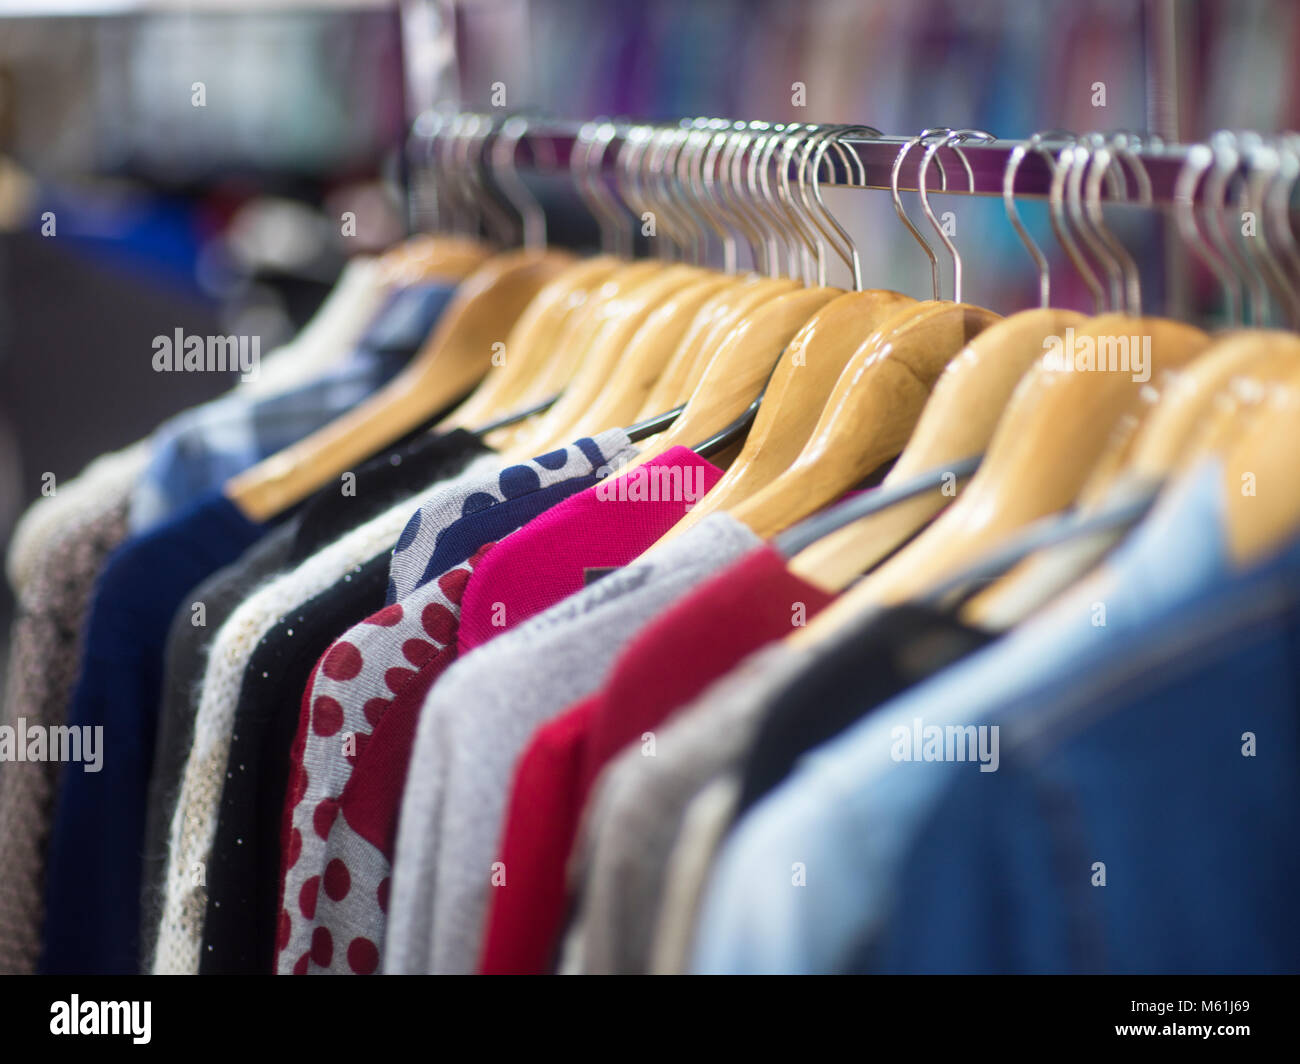 Fashionable clothes on hangers in a store Stock Photo